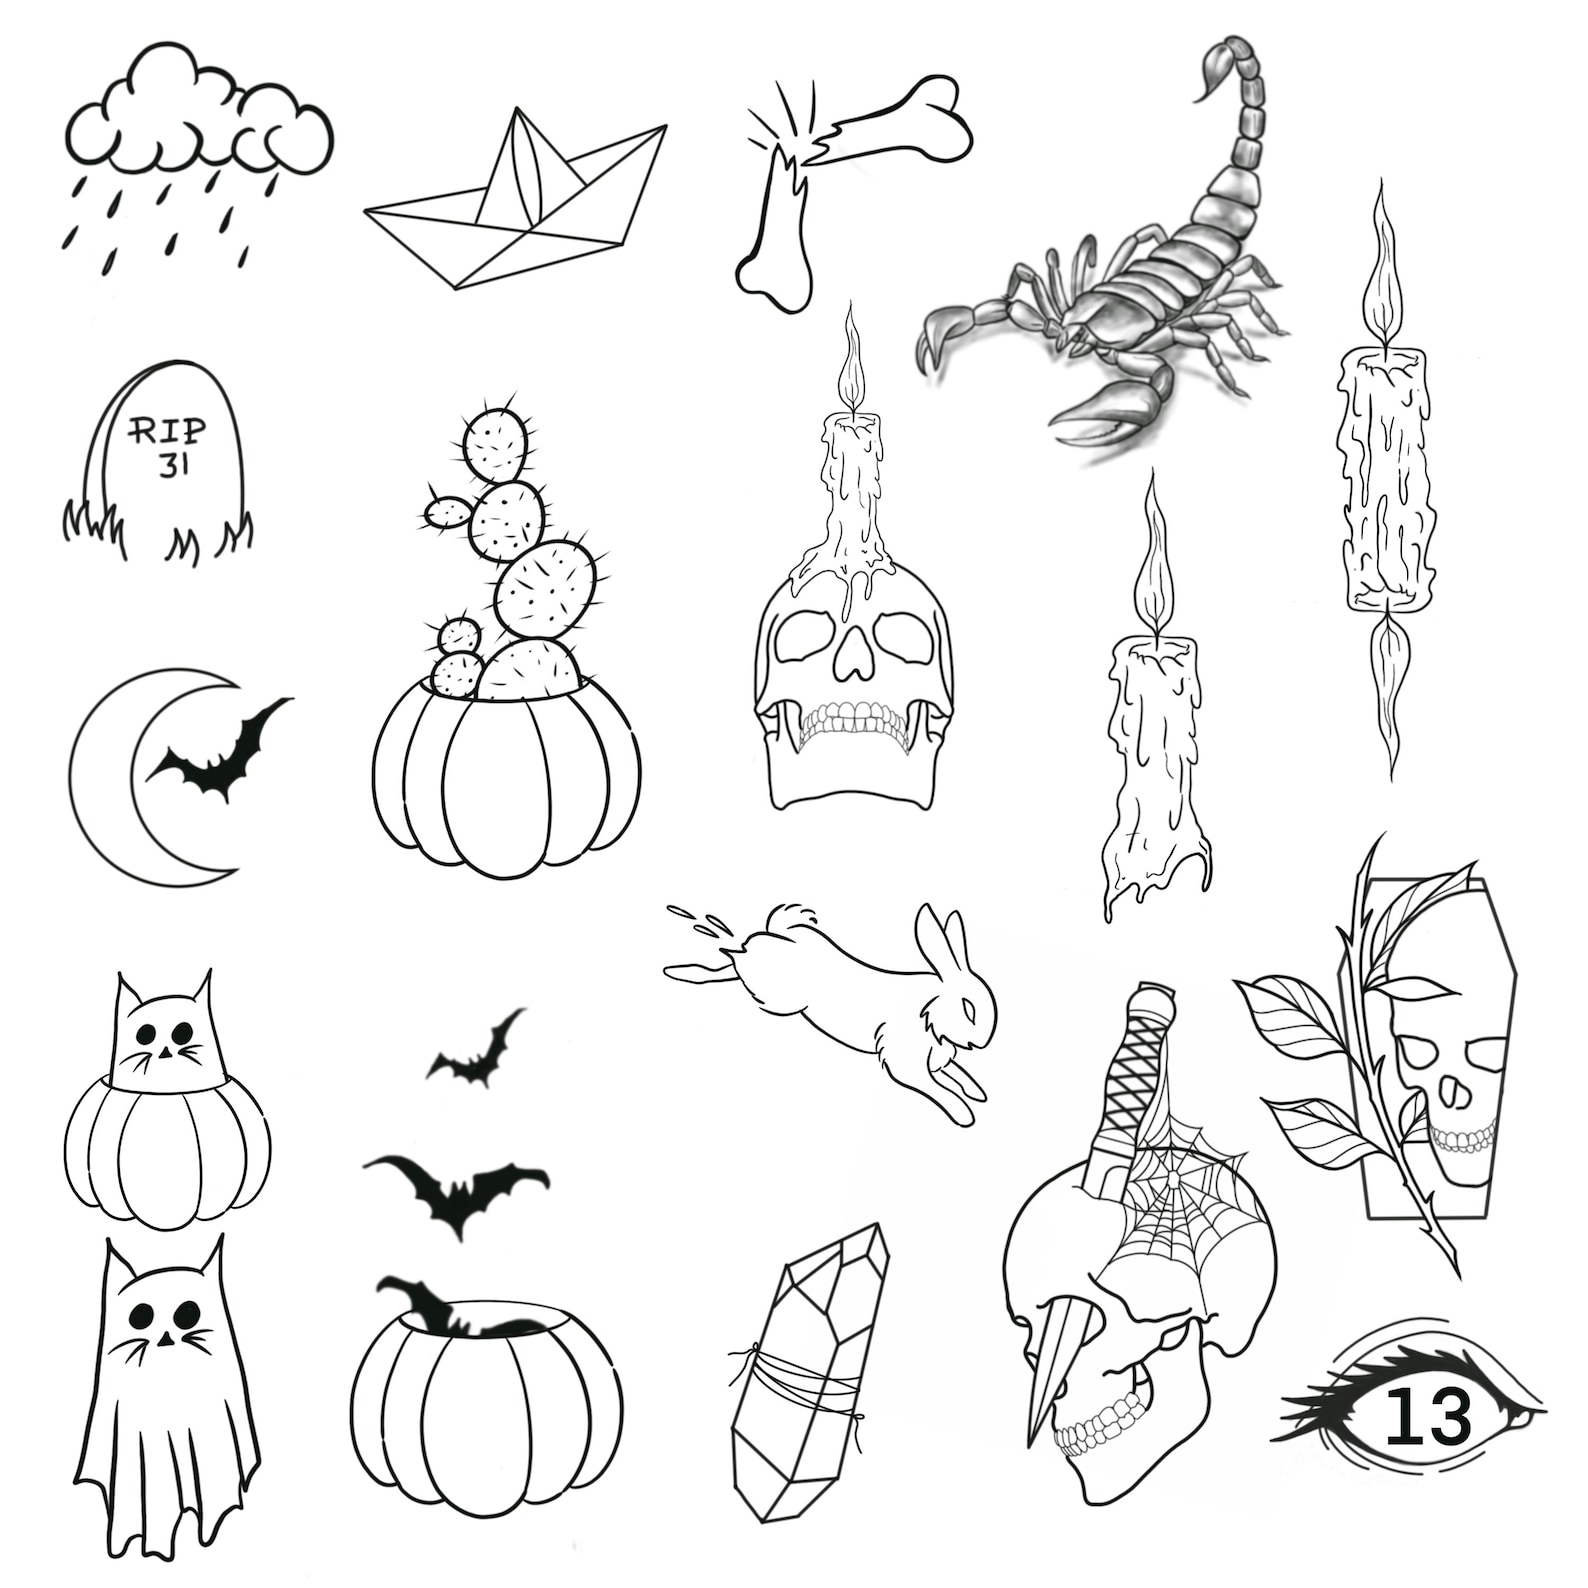 Friday the 13th Tattoo Flash, Spooky Tattoo Flash, Scary Movies Scary ...